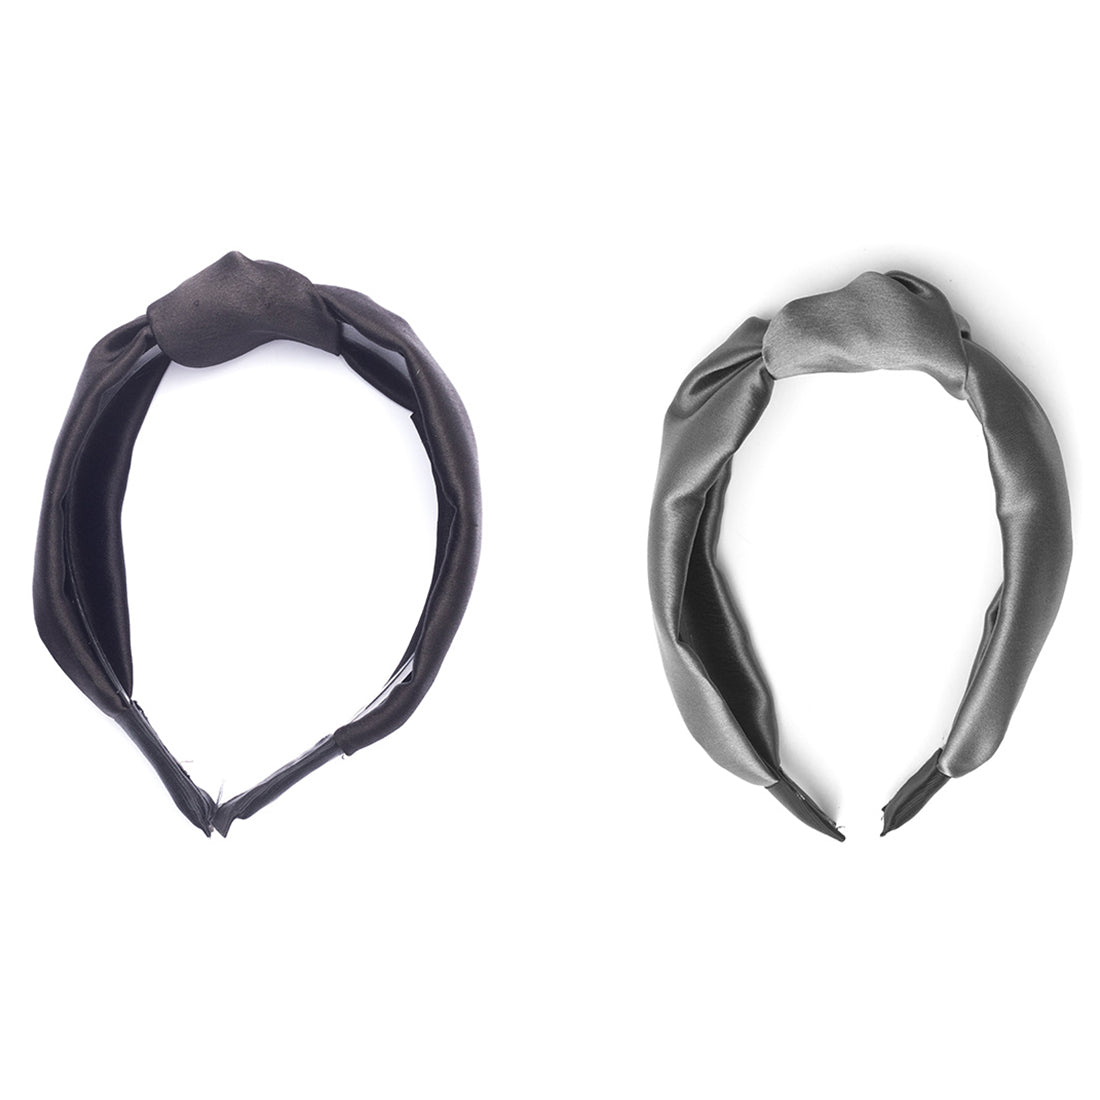 Set Of 2 Chic Grey And Black Satin Hairband With Elegant Top Knot